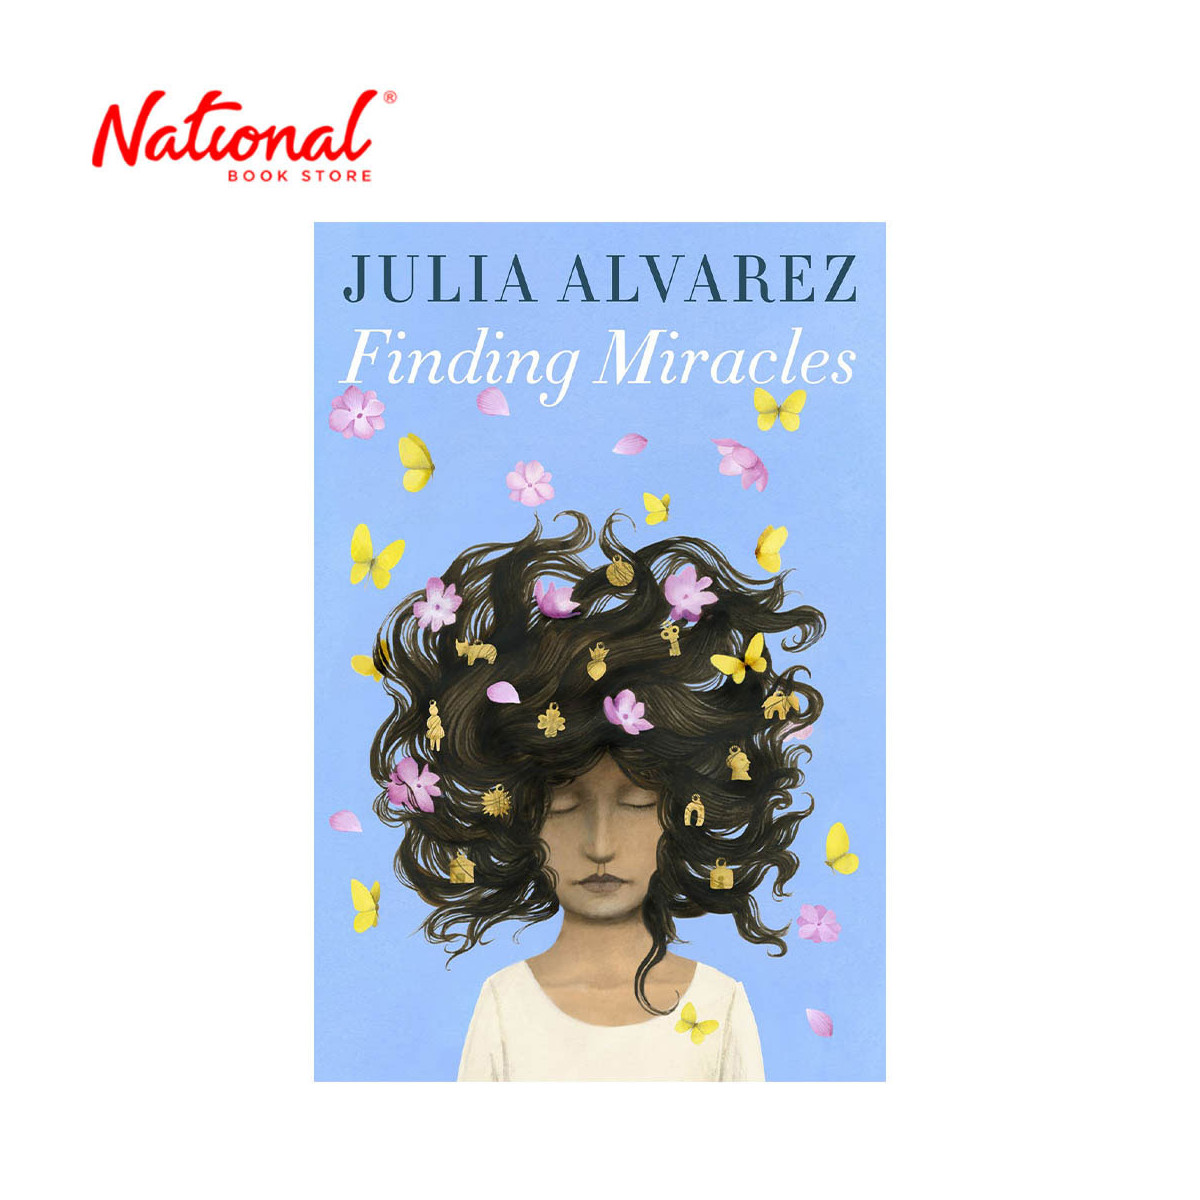 Finding Miracles by Julia Alvarez - Trade Paperback - Teens Fiction - Romance